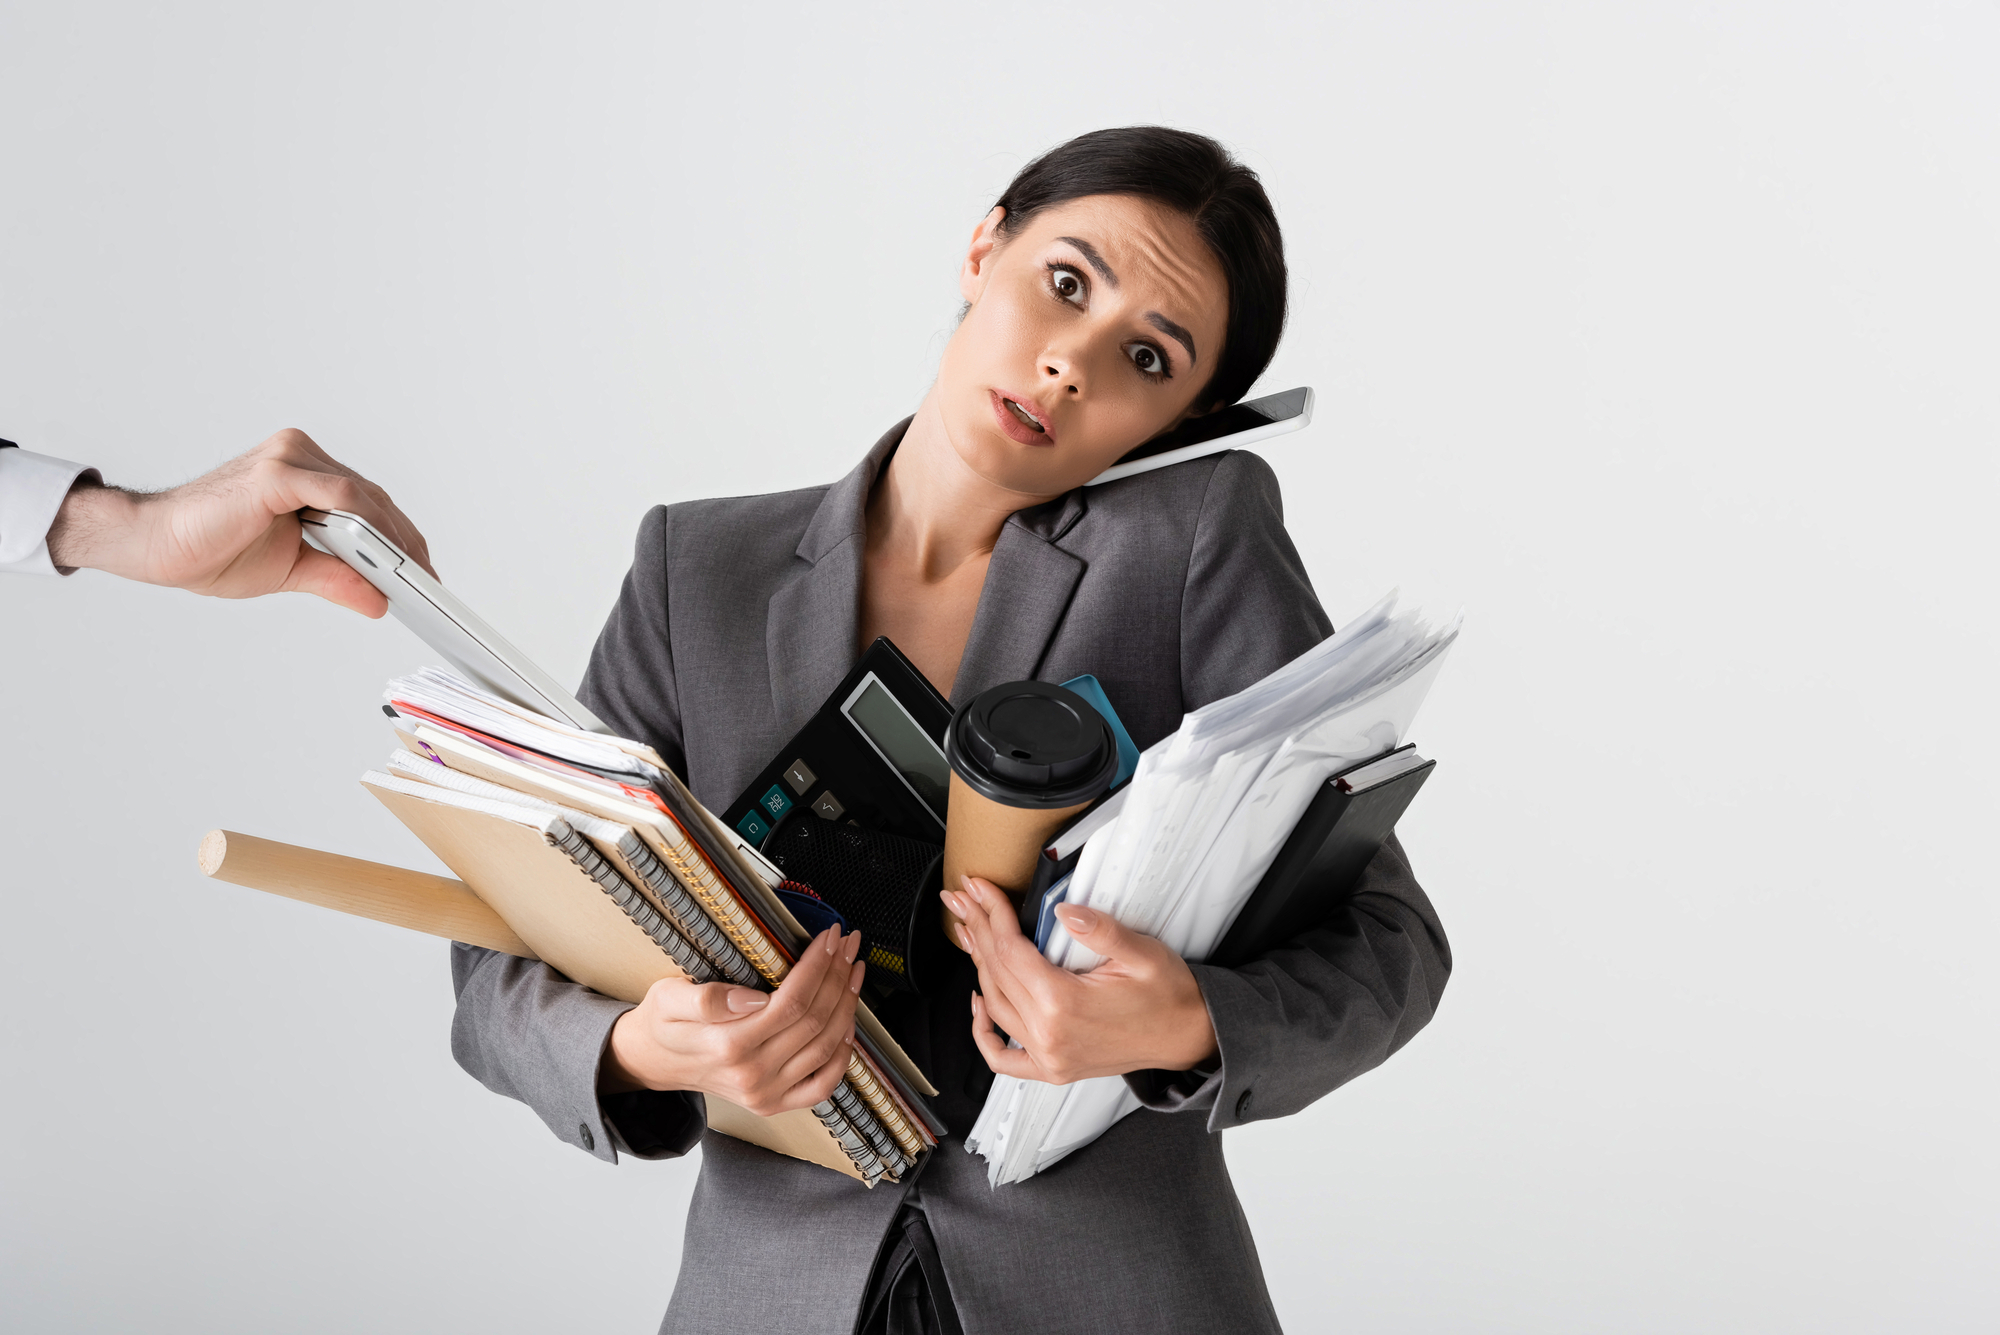 A stressed businesswoman holding documents, coffee, and office supplies as a hand adds more paperwork to her load.